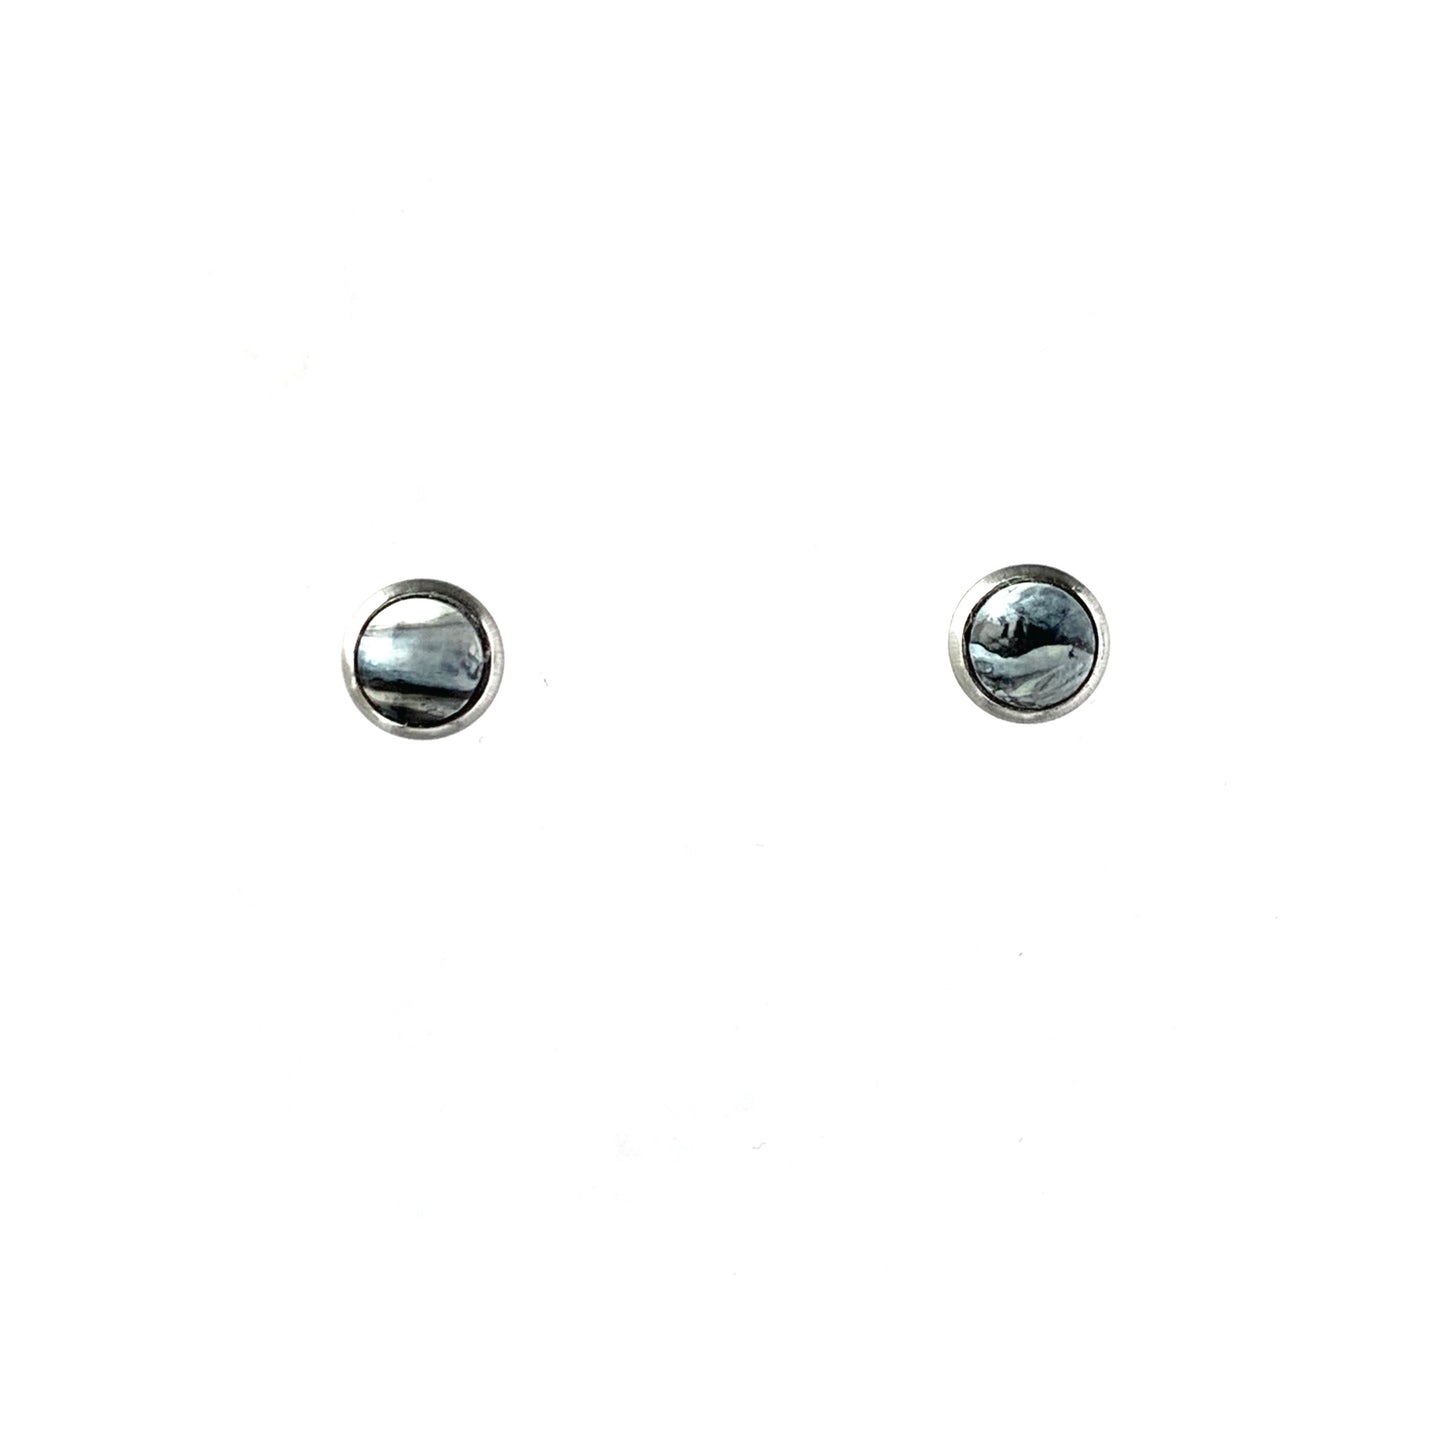 Little studs black and white stainless steel eco friendly Recycled plastic necklace jewellery earrings studs handmade in London by Jagoda Jay Sudak Keshani eco gift for her him